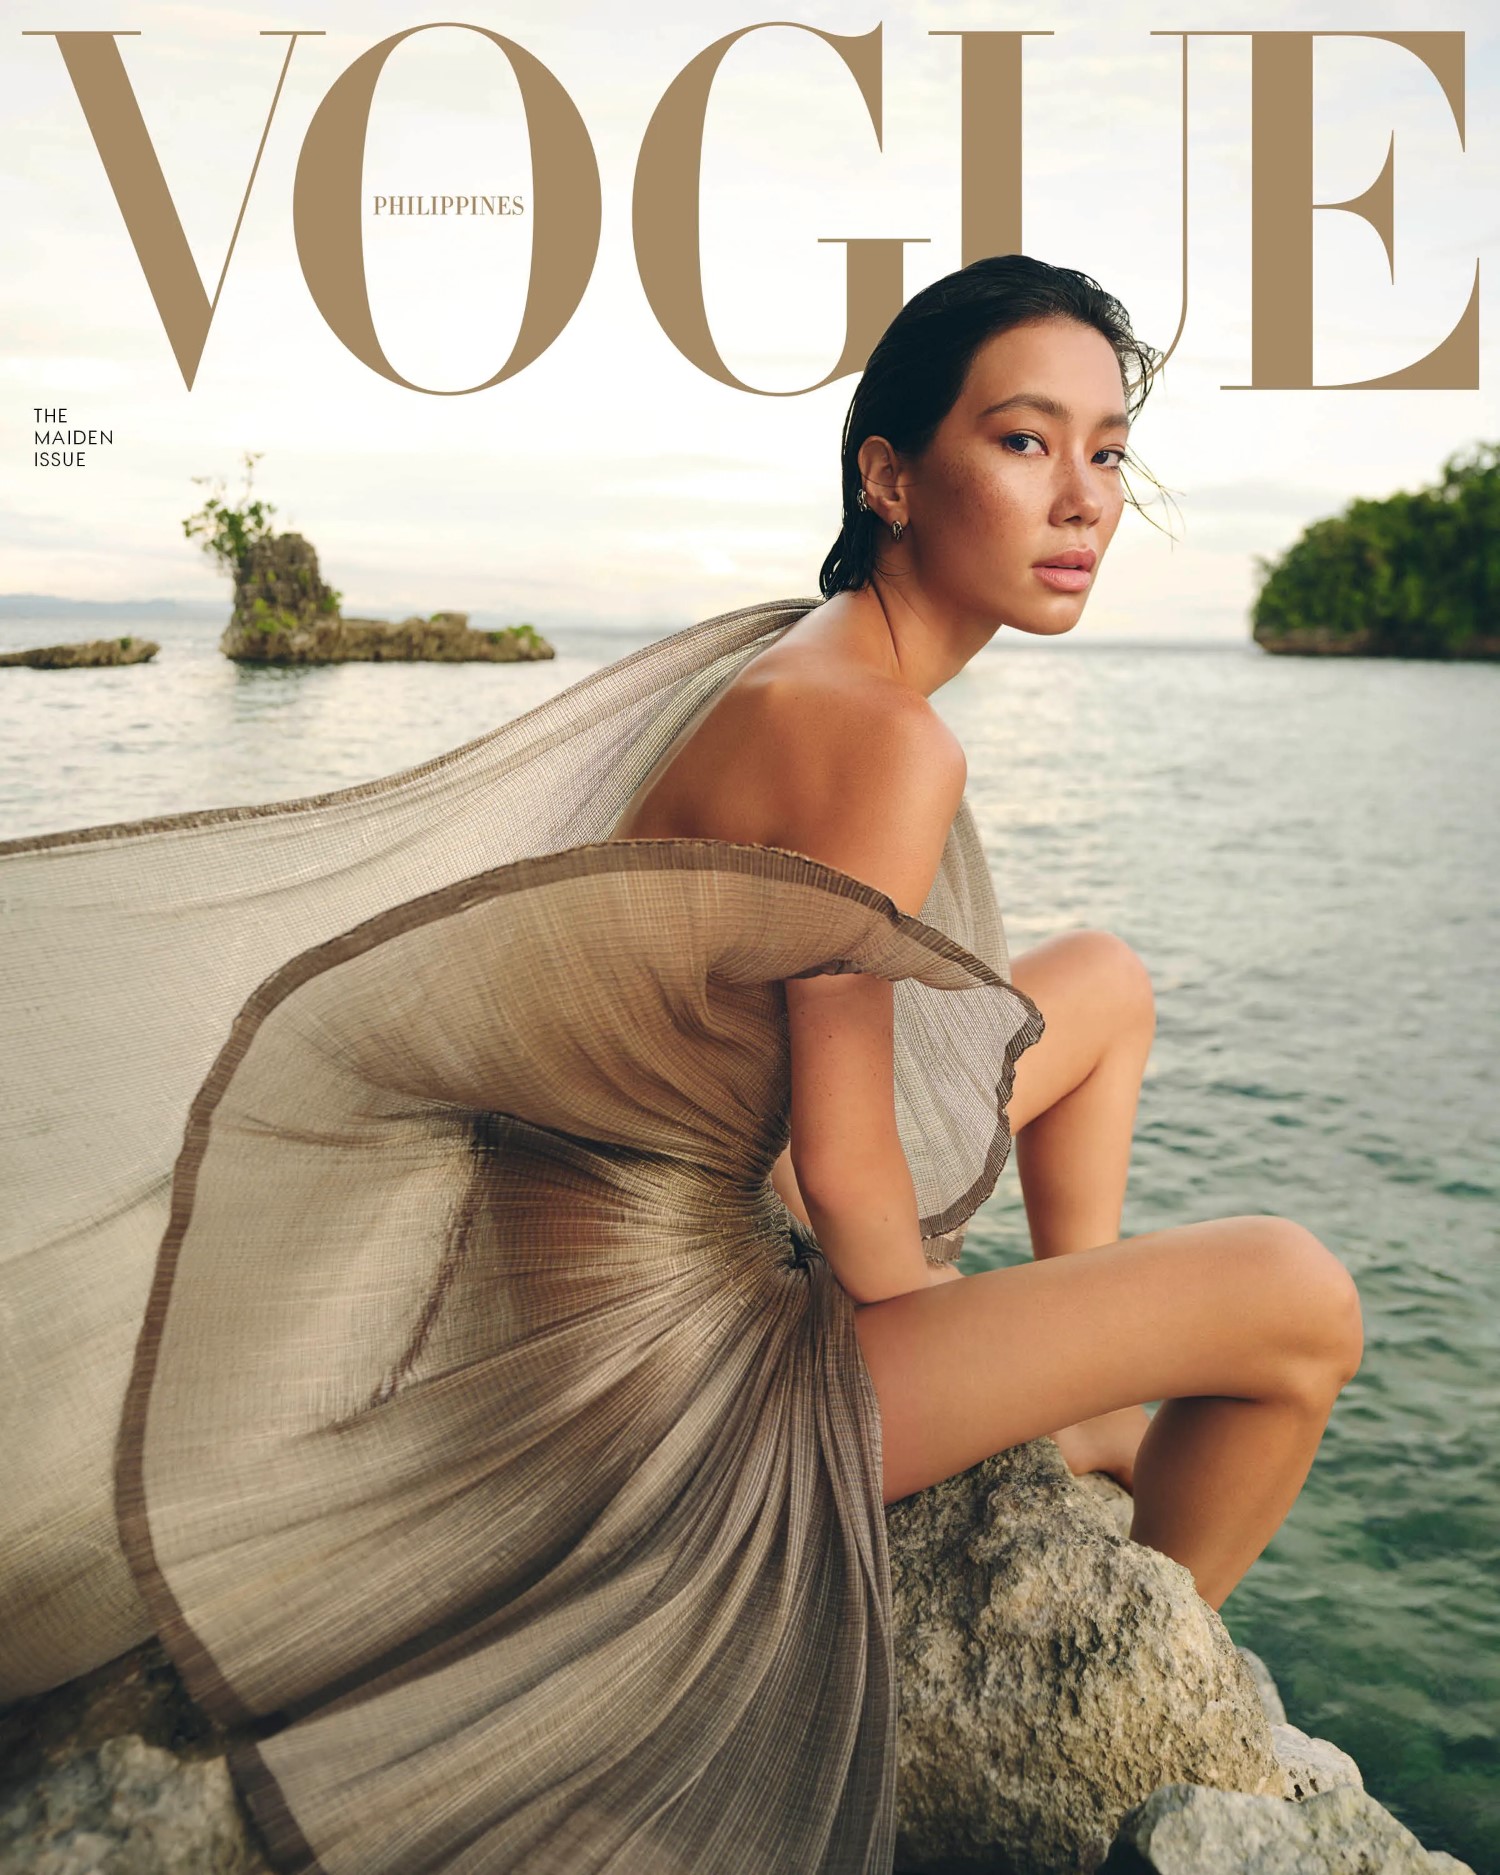 Chloe Magno covers Vogue Philippines September 2022 by Sharif Hamza